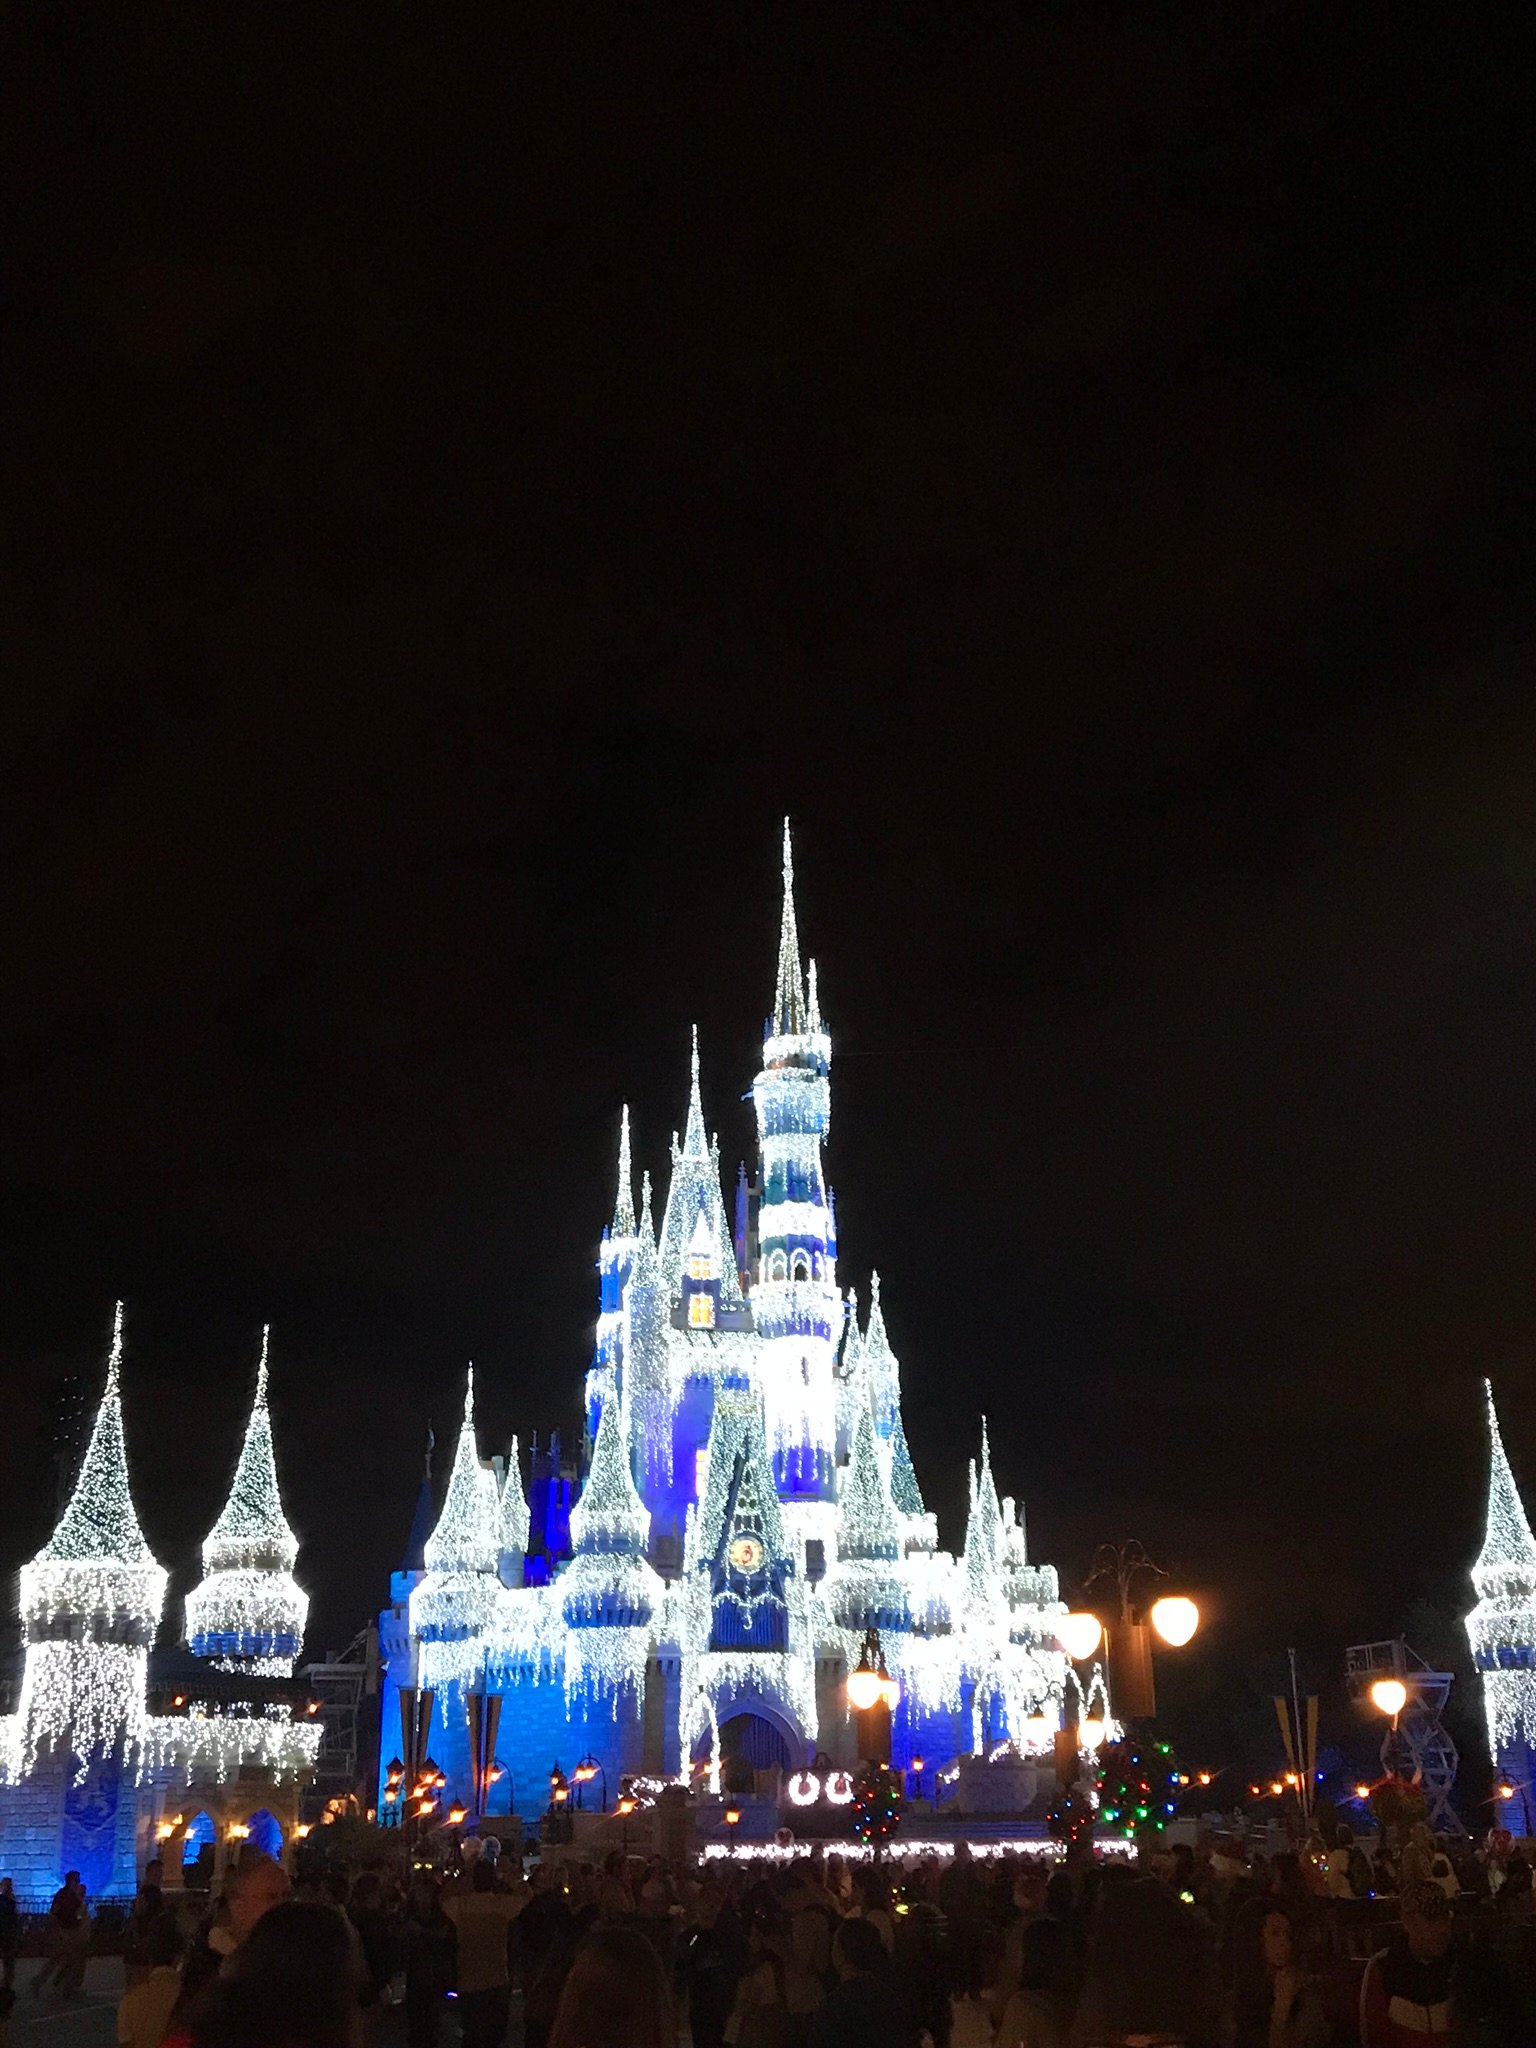 Cinderella's castle decorated for Christmas with the night sky background